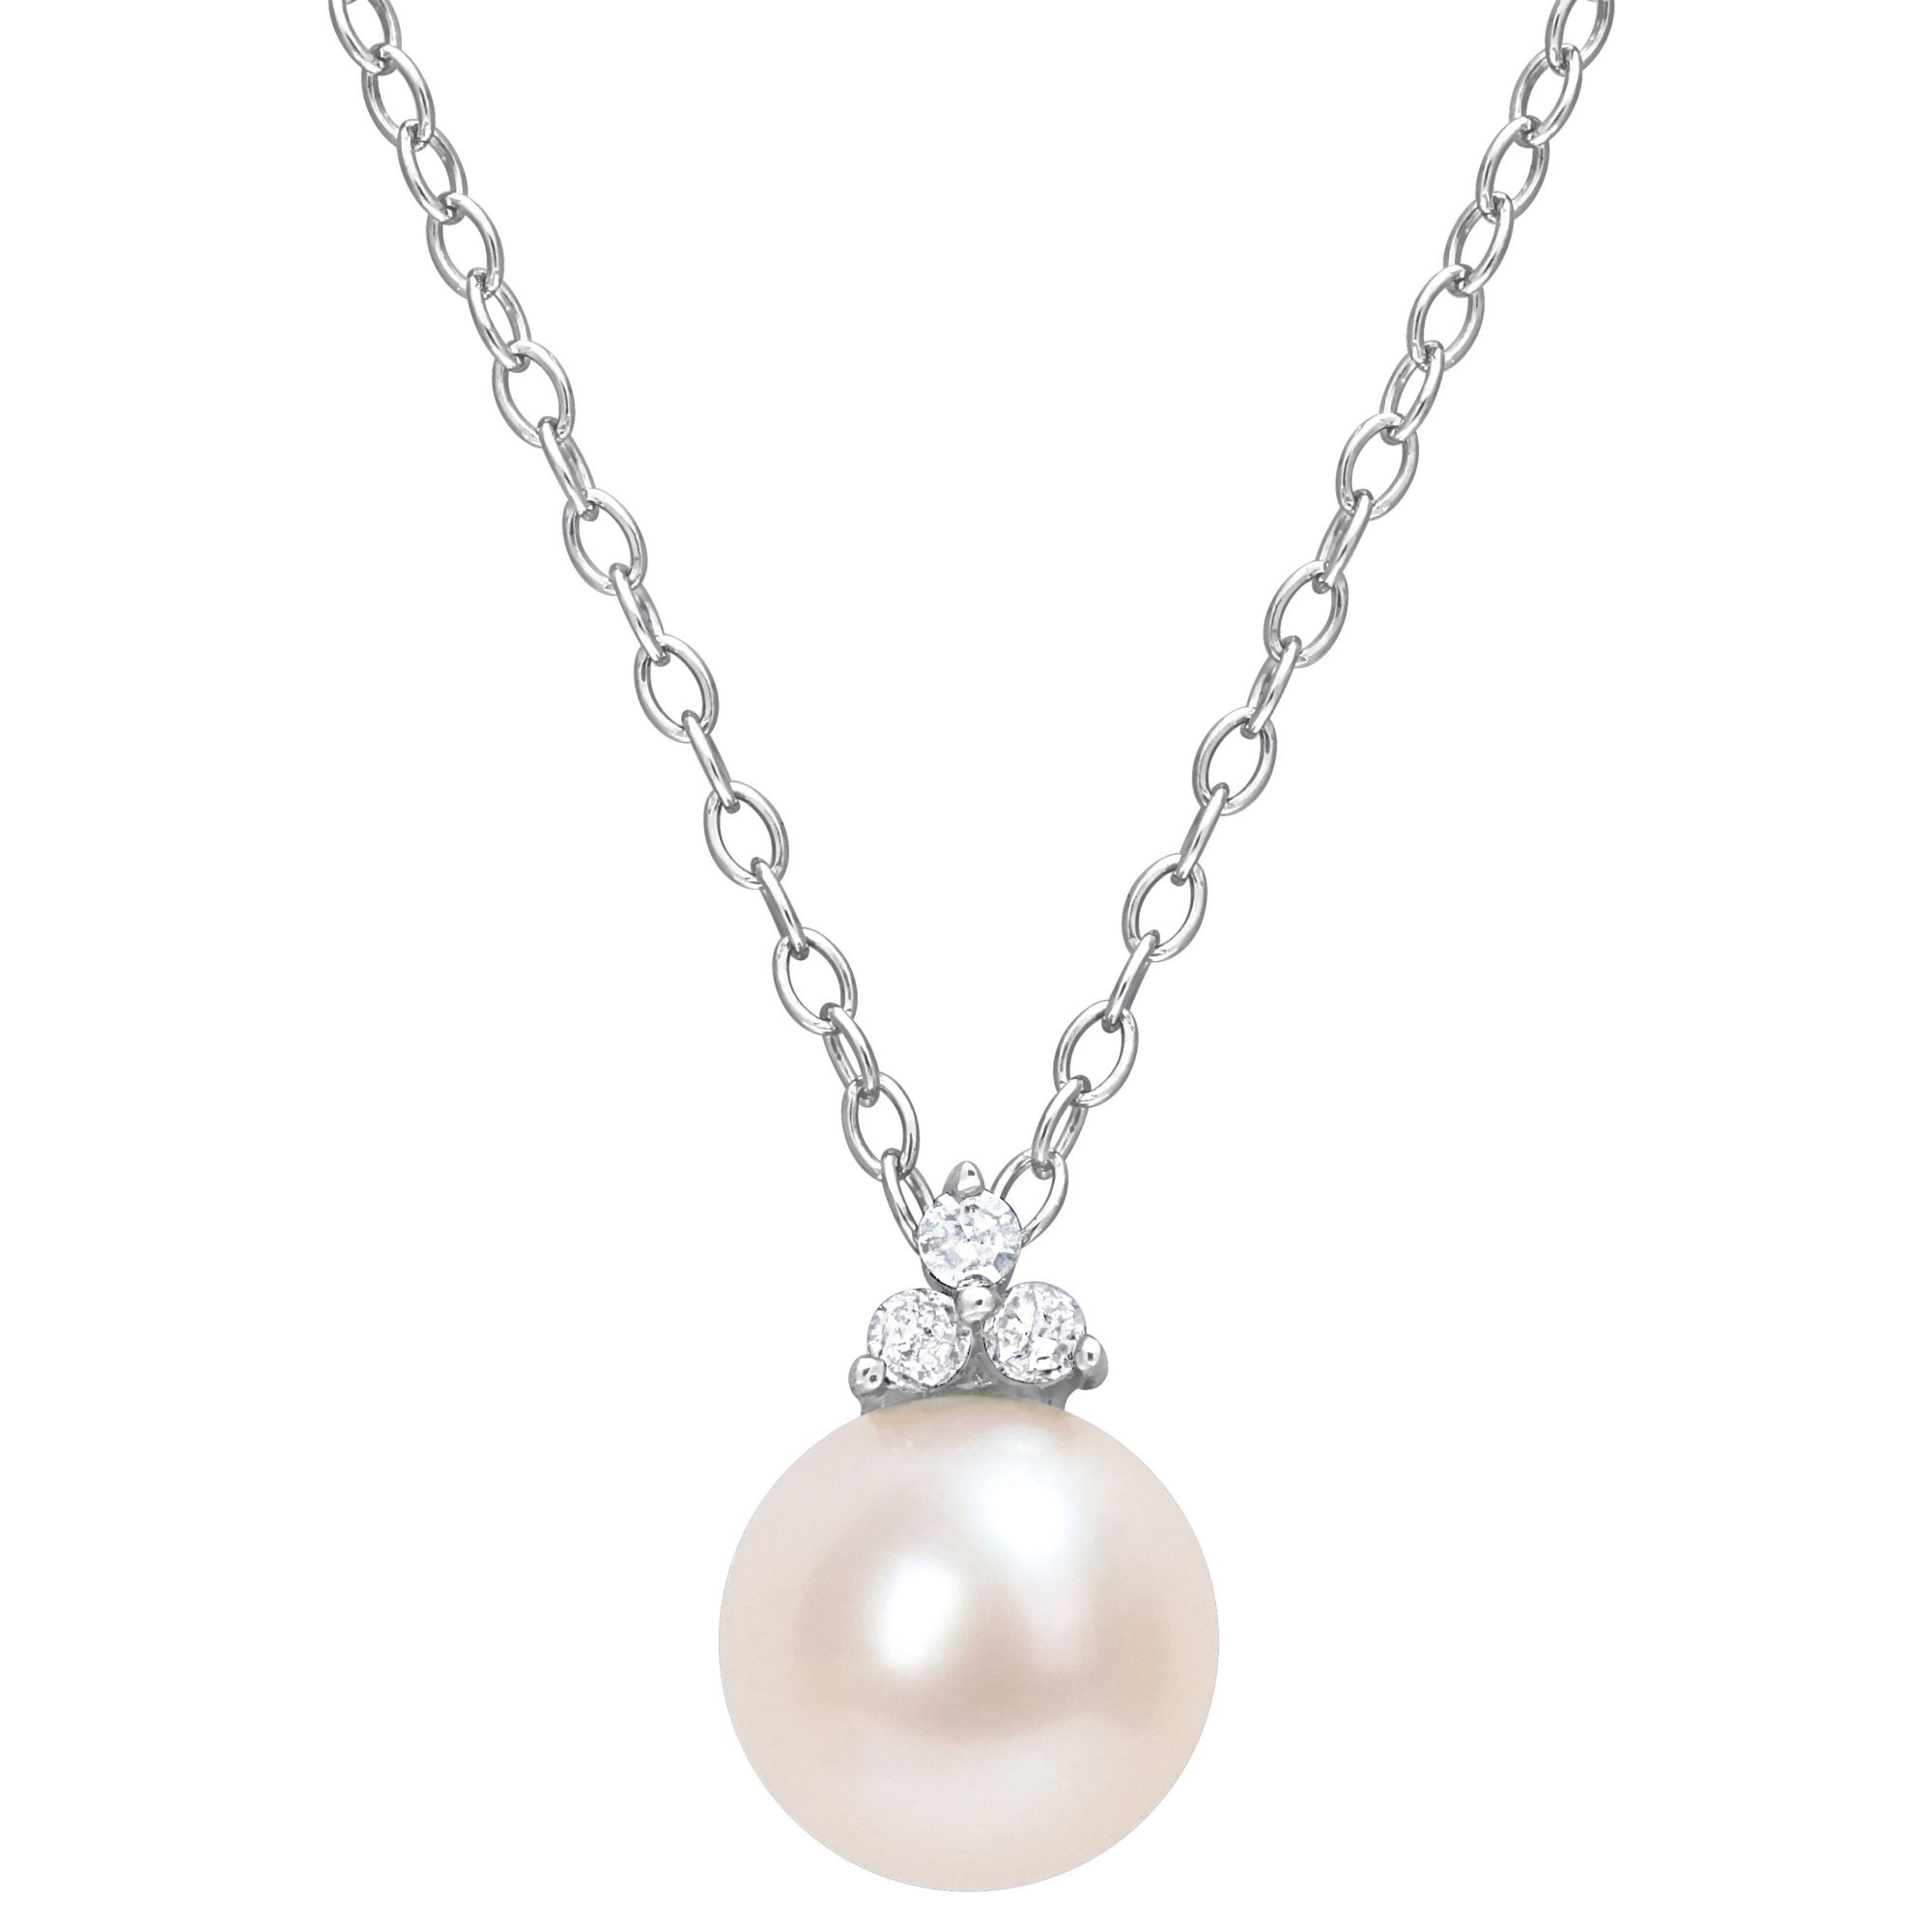 IMPERIAL® 7.0-8.0mm Cultured Freshwater Pearl Strand Necklace with